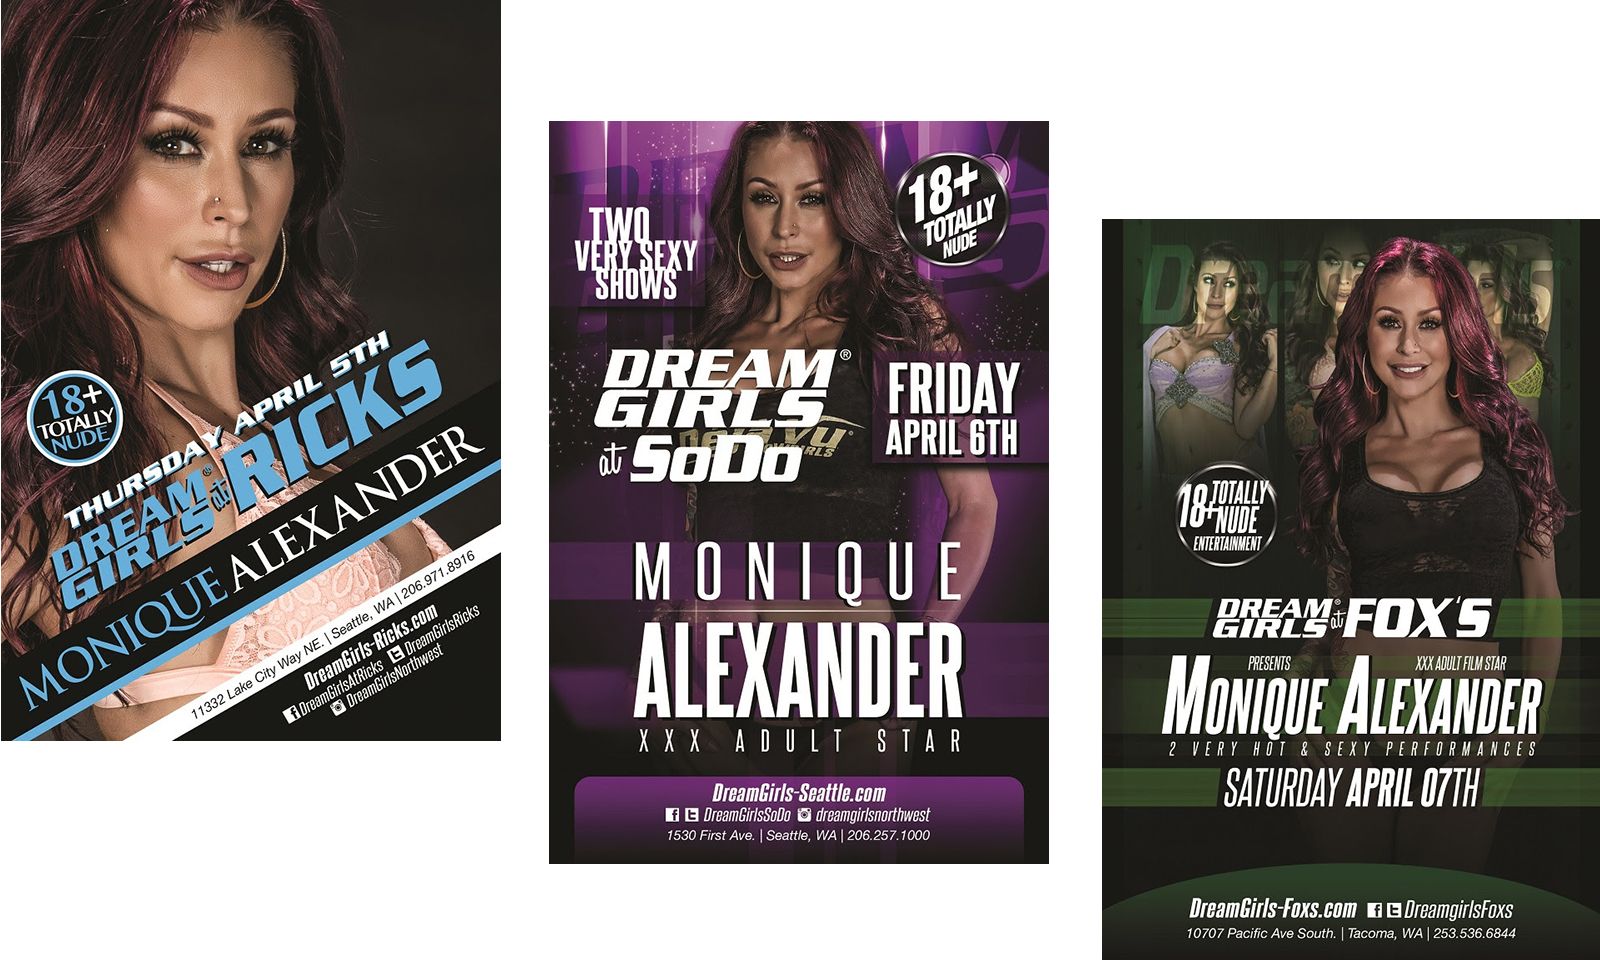 Monique Alexander To Feature At 3 Seattle Area "DreamGirls" Clubs